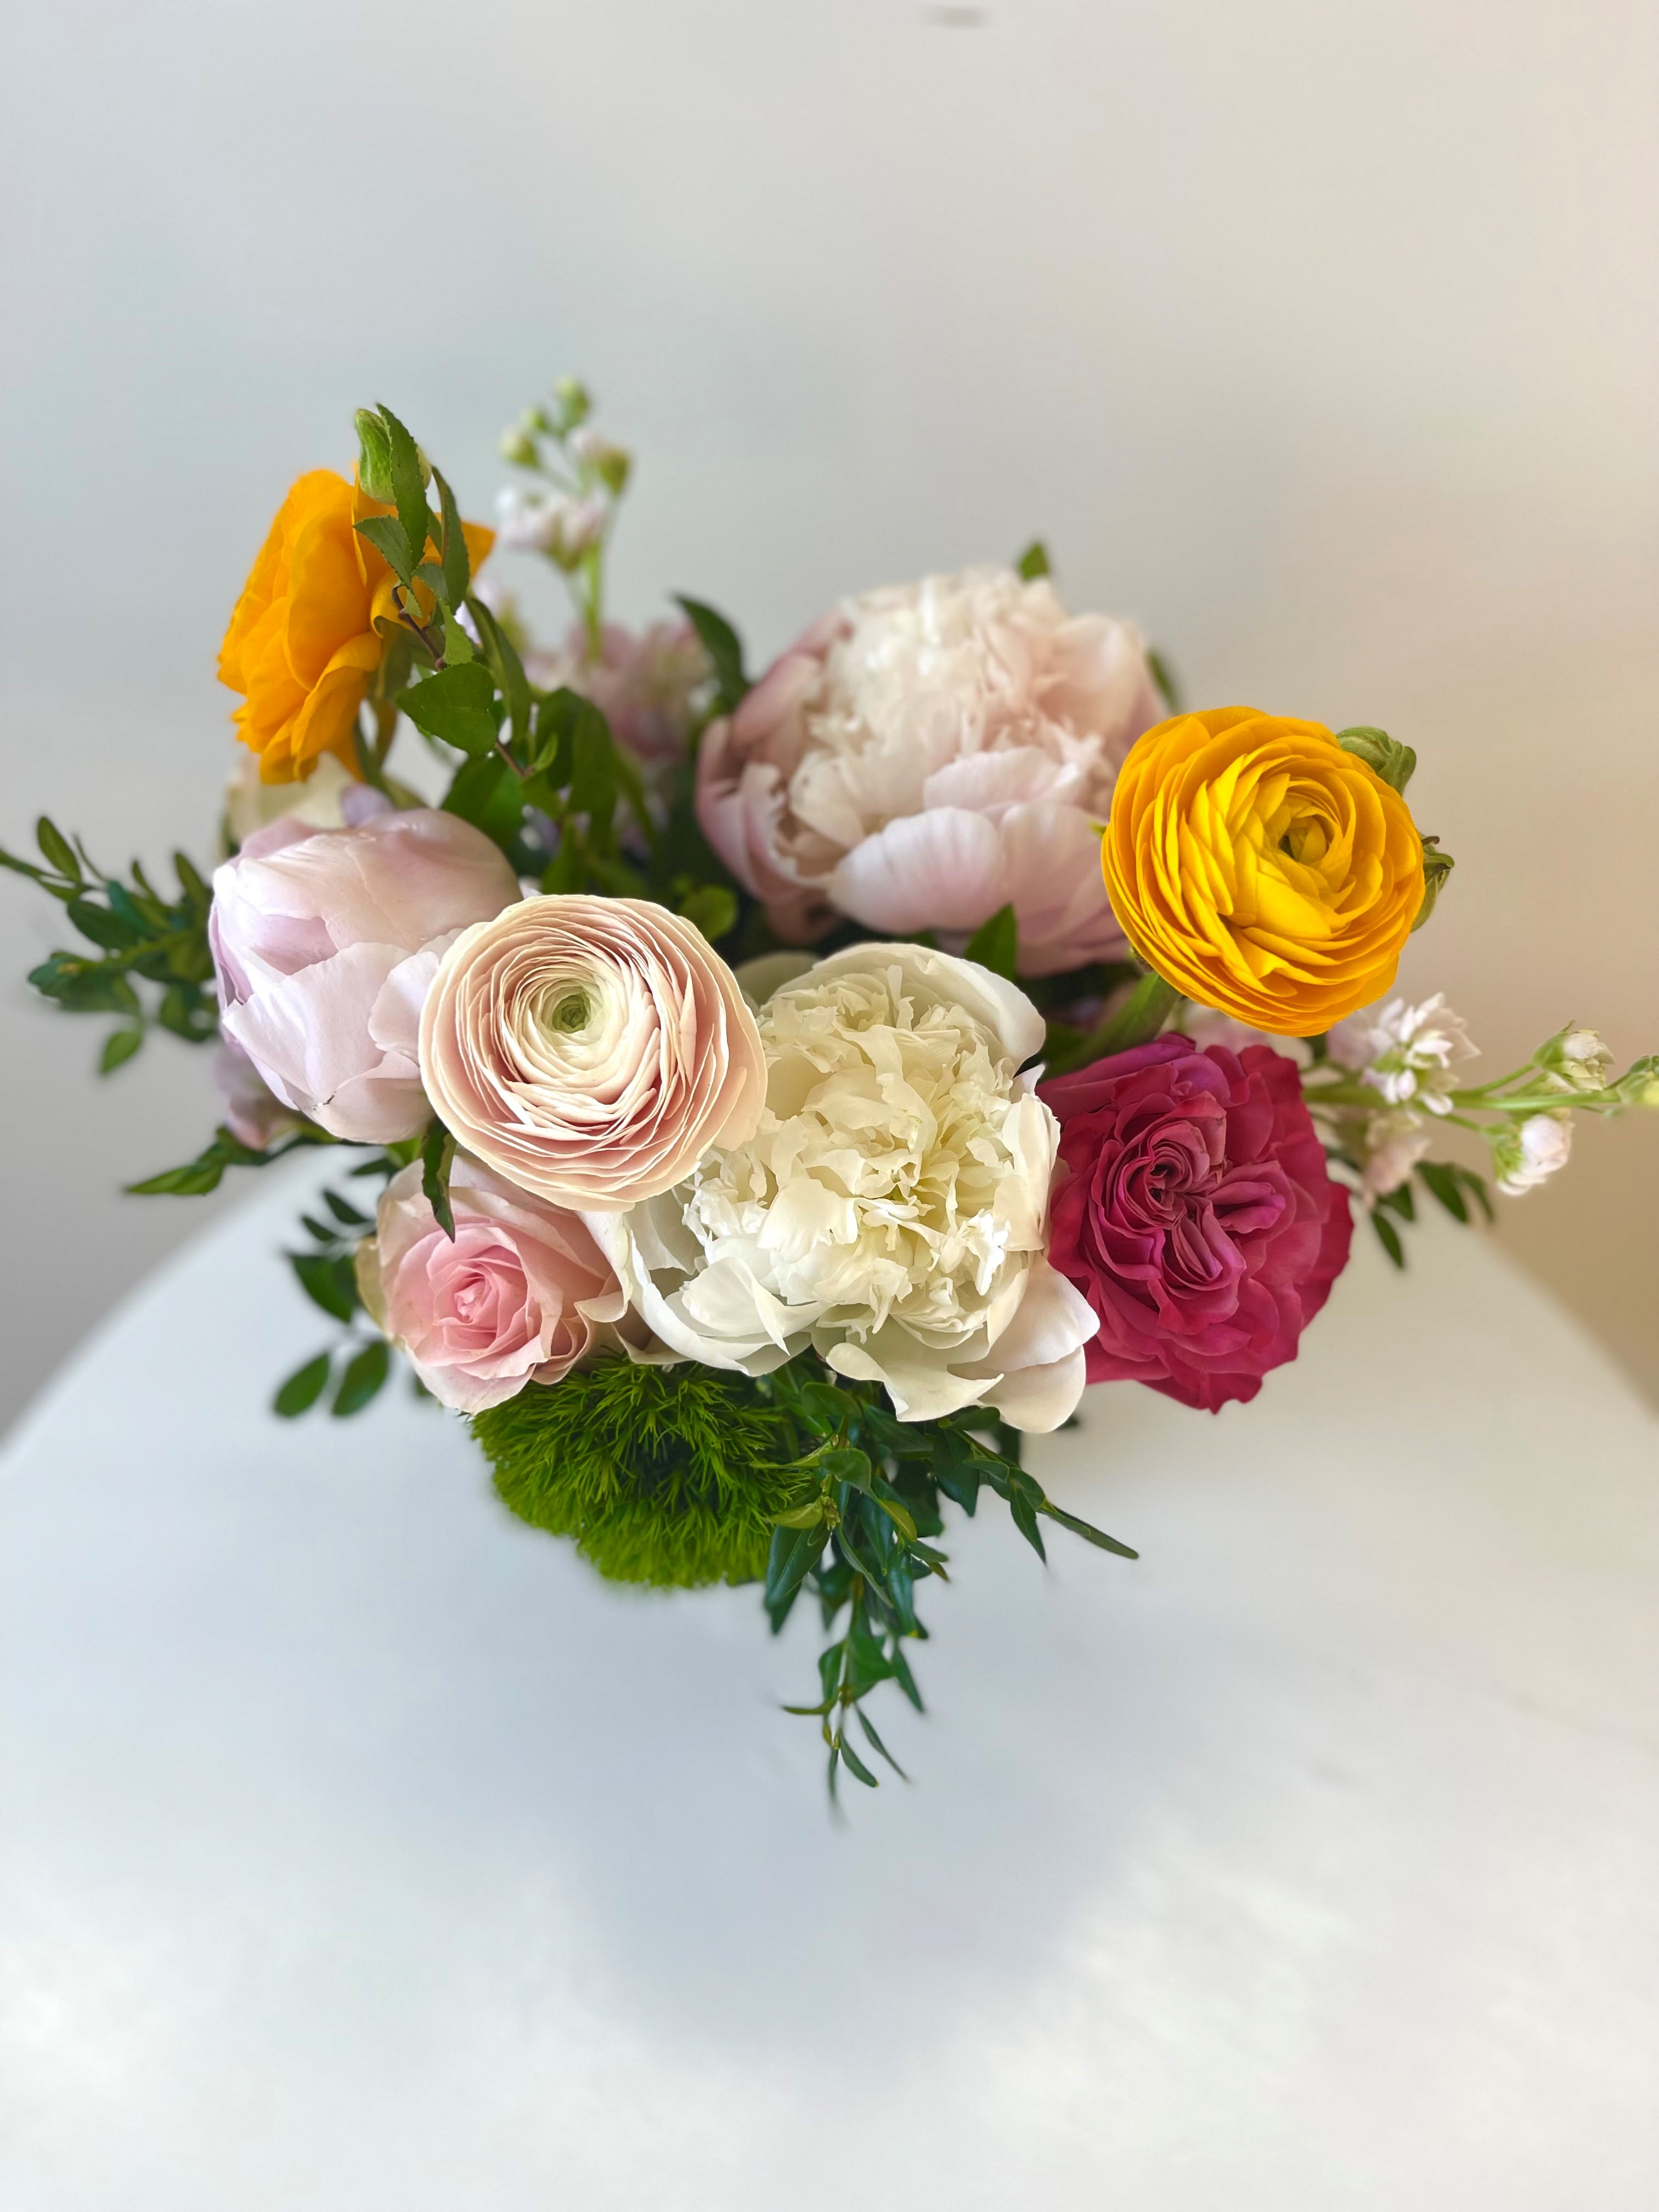 Pops of Color - This perfect fishbowl filled with ranunculus, peonies and roses is a great pop of color that is sure to make them smile.